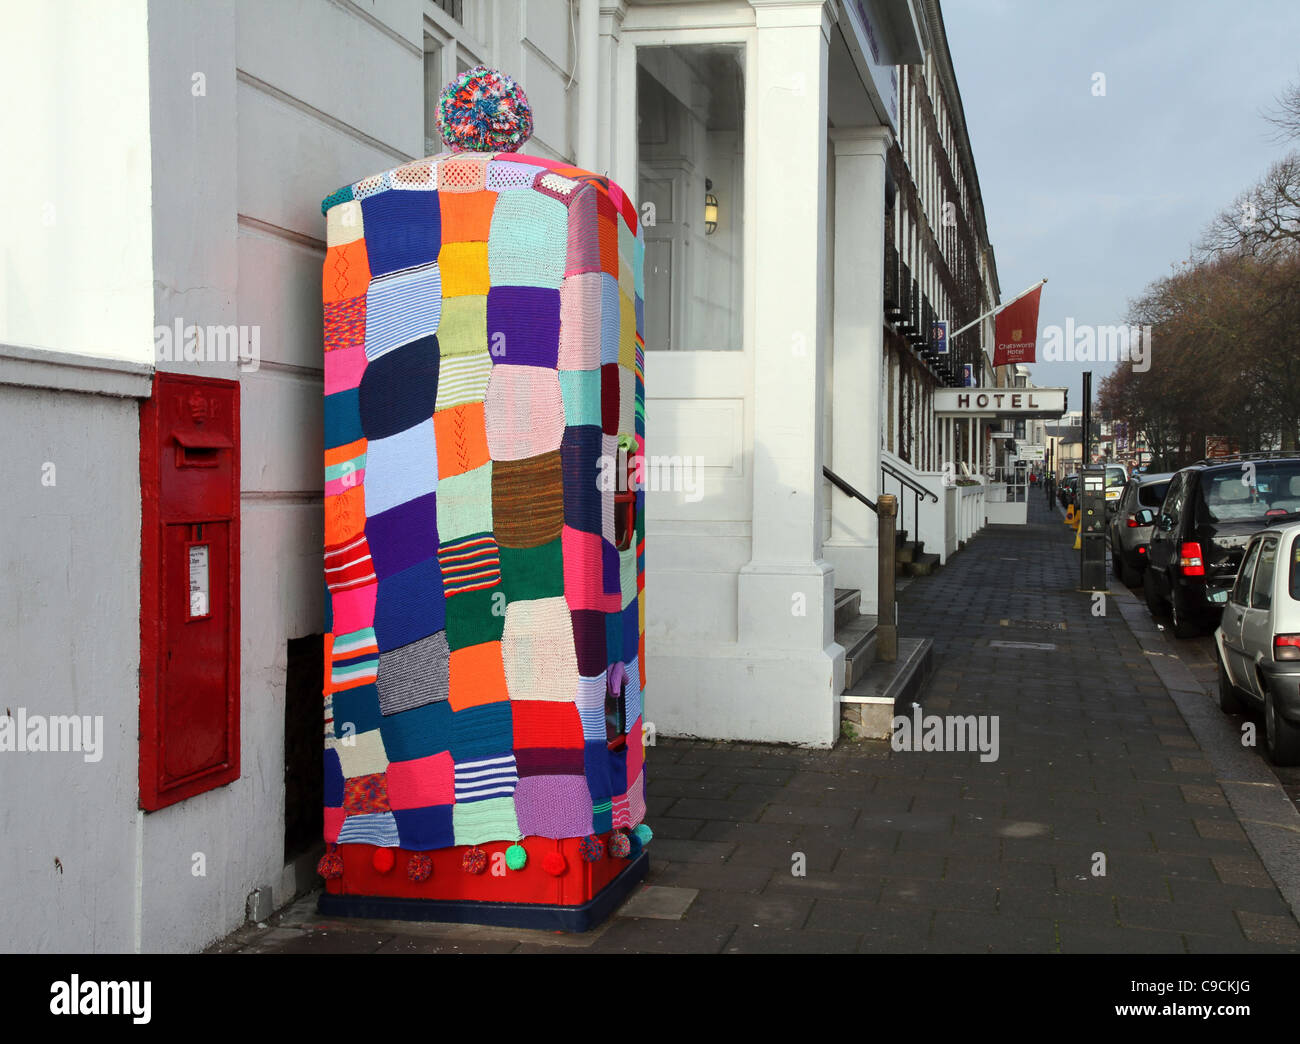 A red public telephone kiosk that had been covered over with knitting like a big tea cosy. Stock Photo